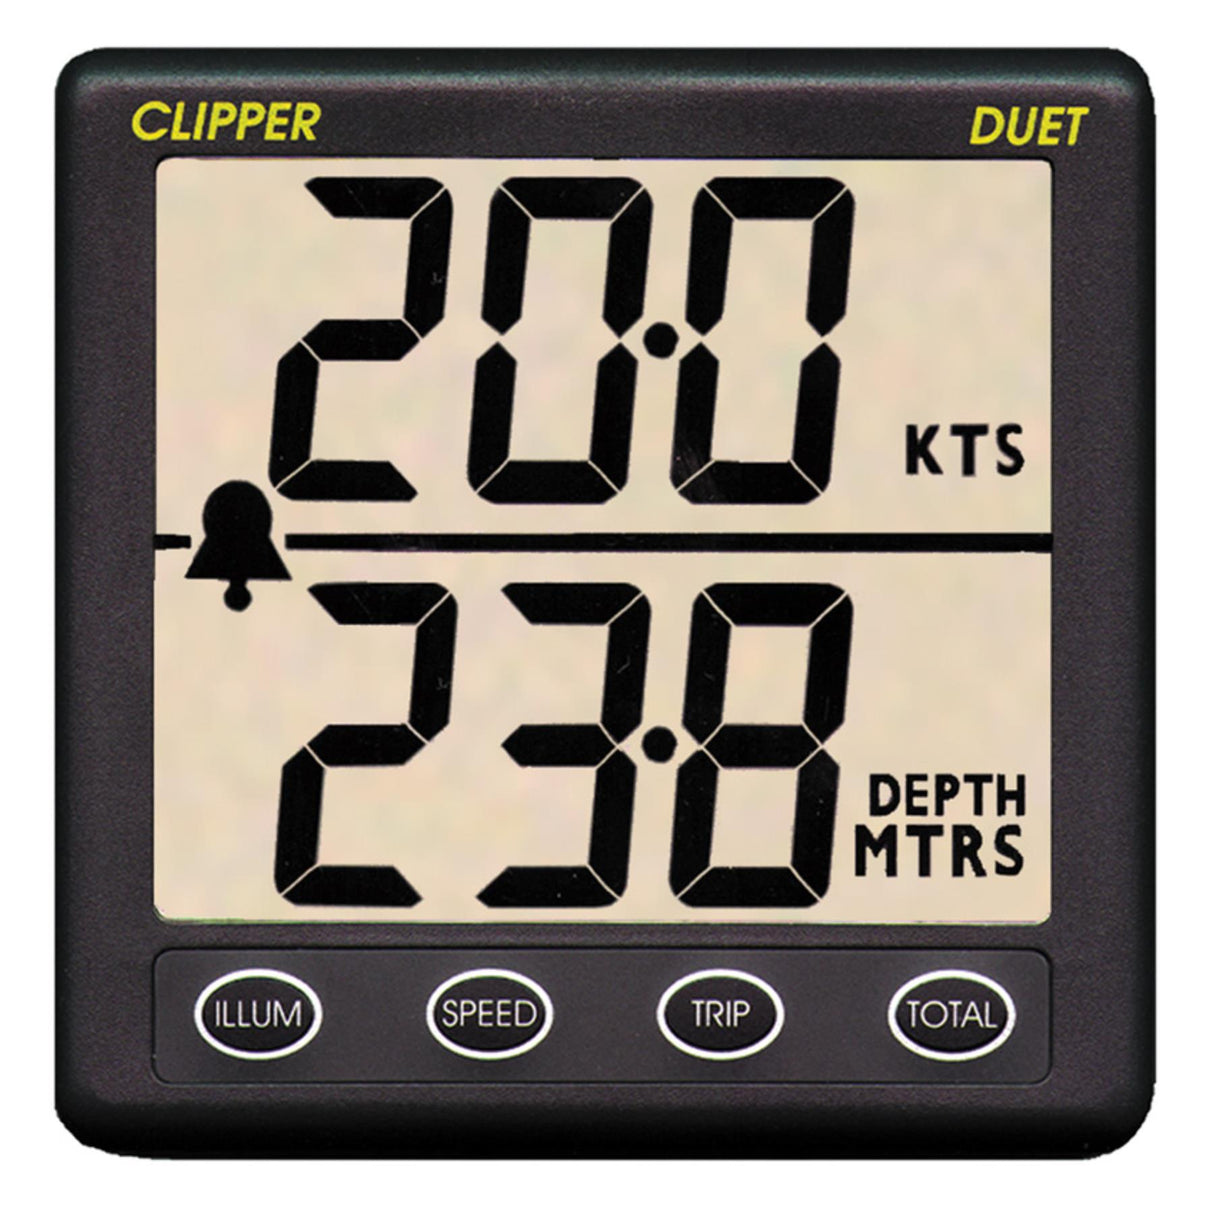 Nasa Electromagnetic 3 Log & Data Box with Clipper Duet - PROTEUS MARINE STORE